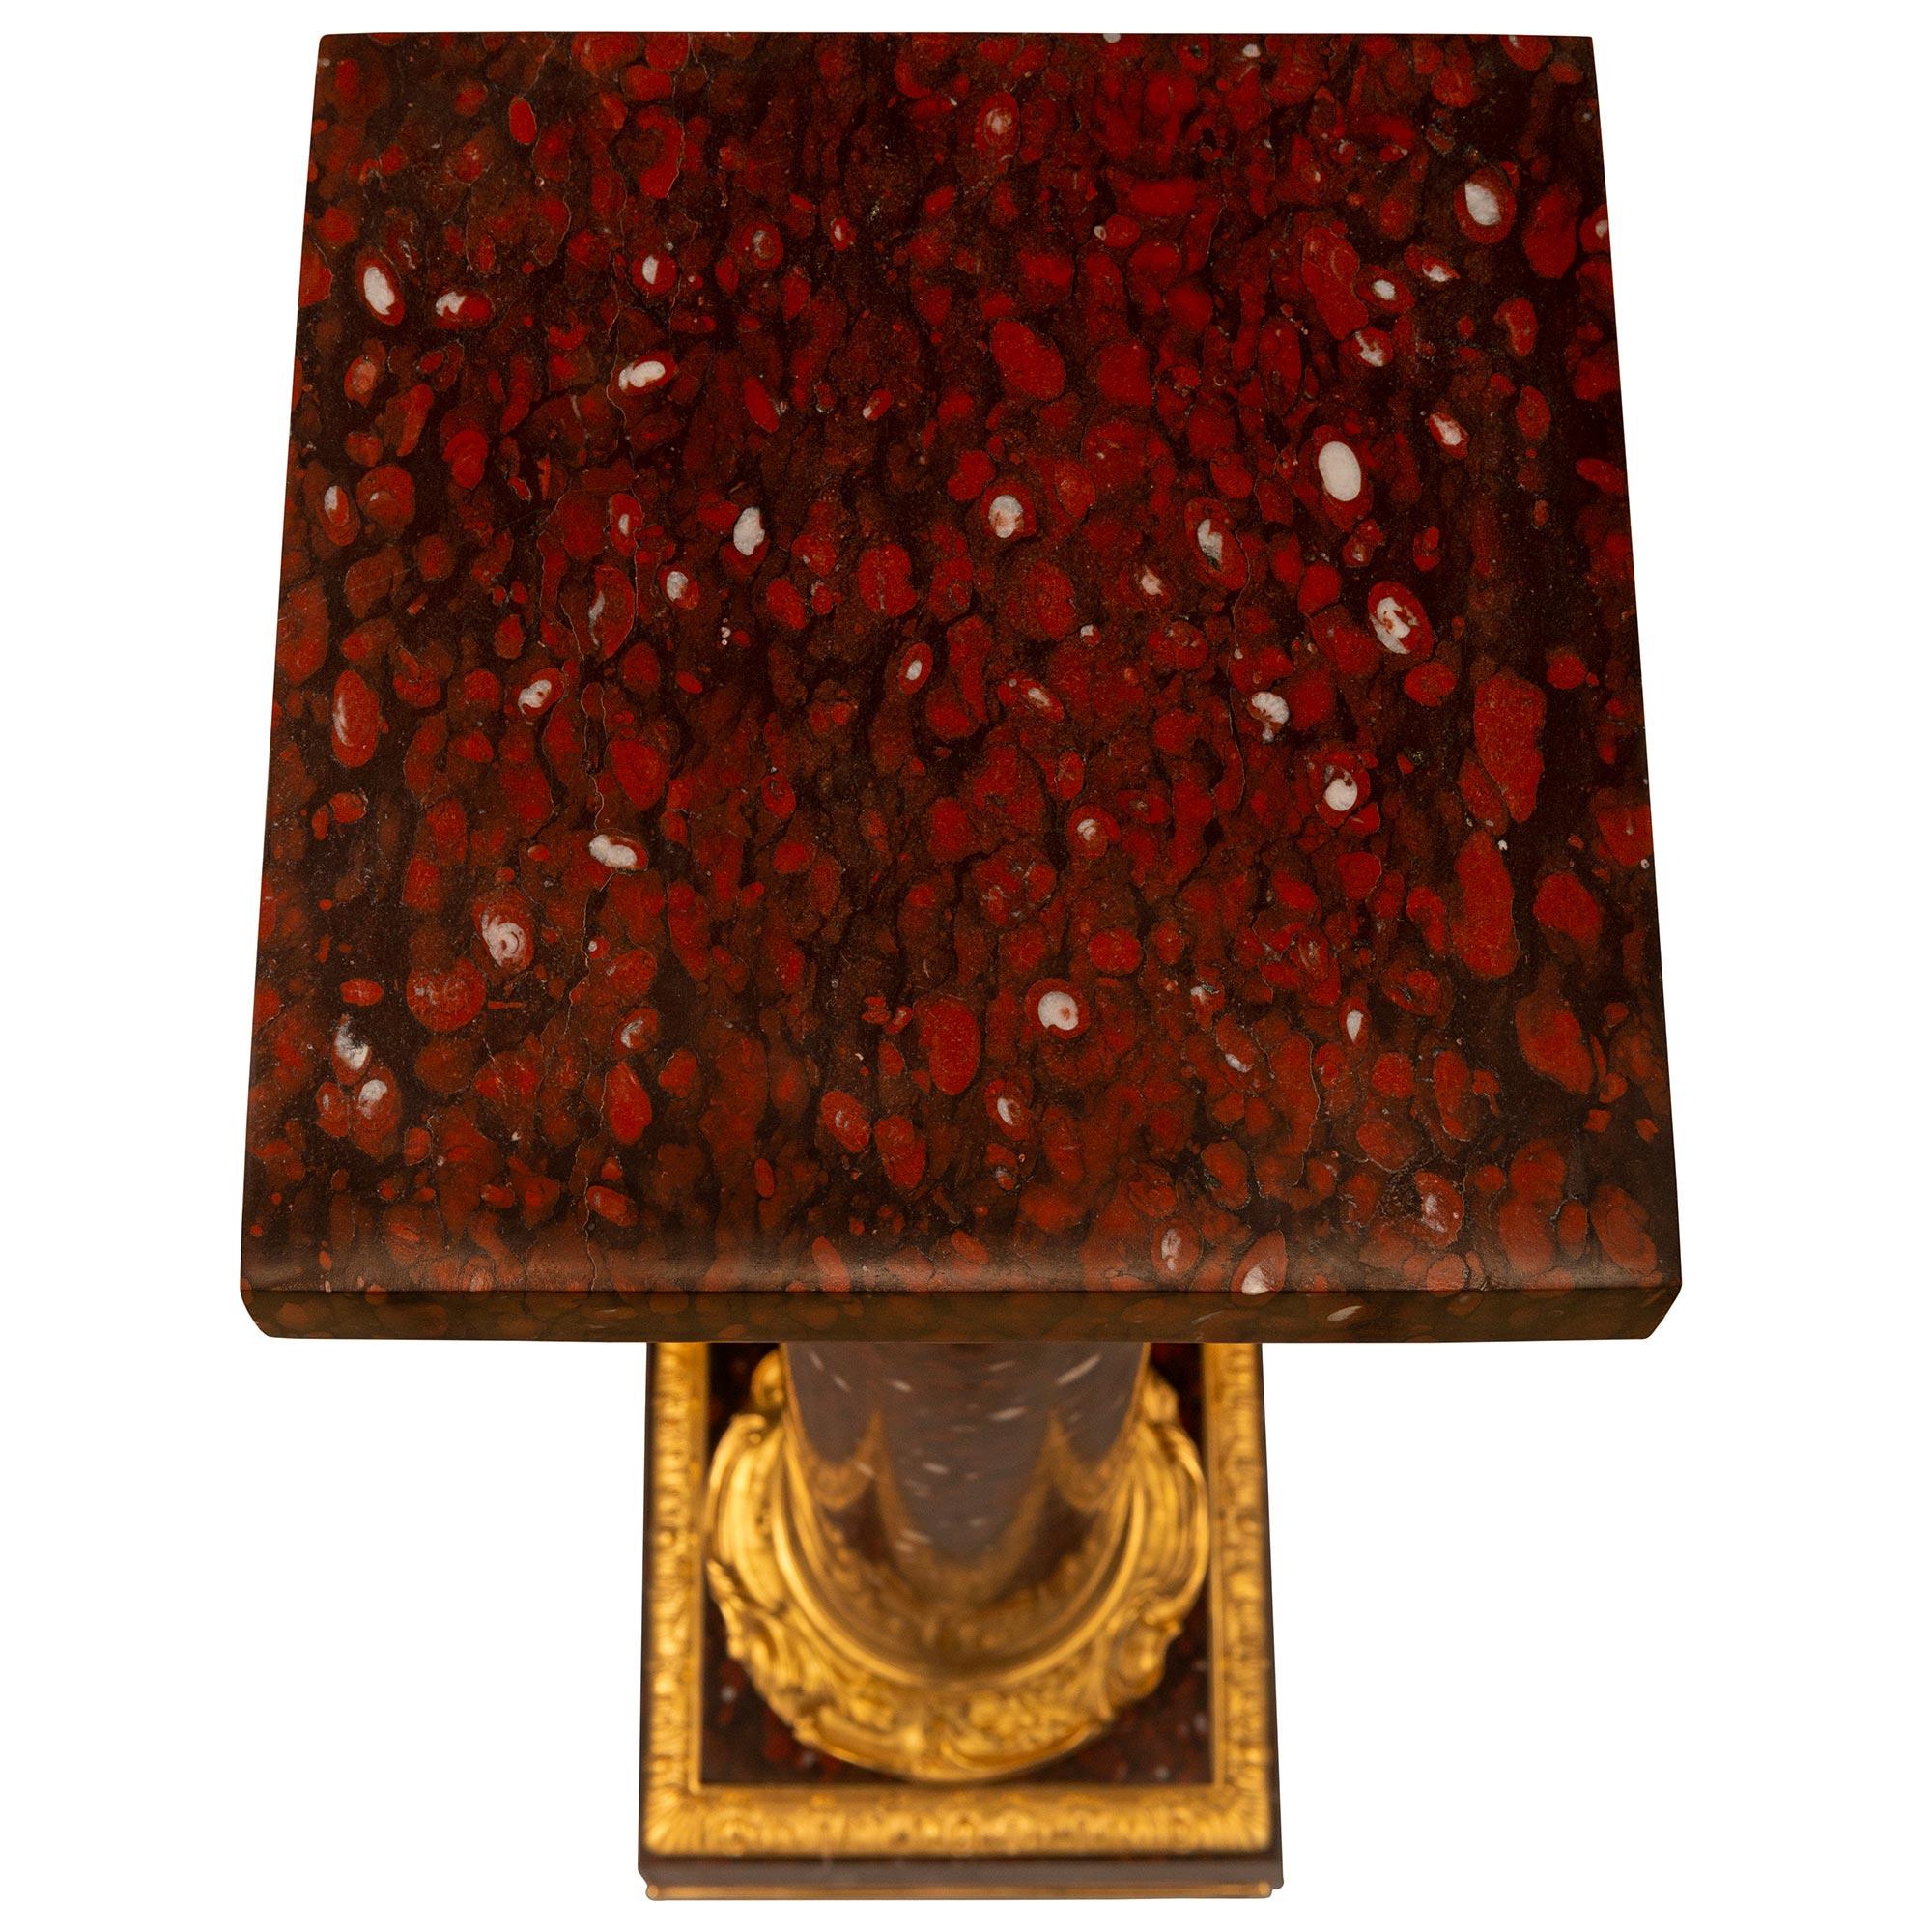 A striking French 19th century Louis XVI st. Rouge Griotte marble and Ormolu pedestal column. The column is raised by a square Rouge Griotte marble base with an Ormolu upper edge with foliate designs. Above the base is a circular Ormolu plinth with